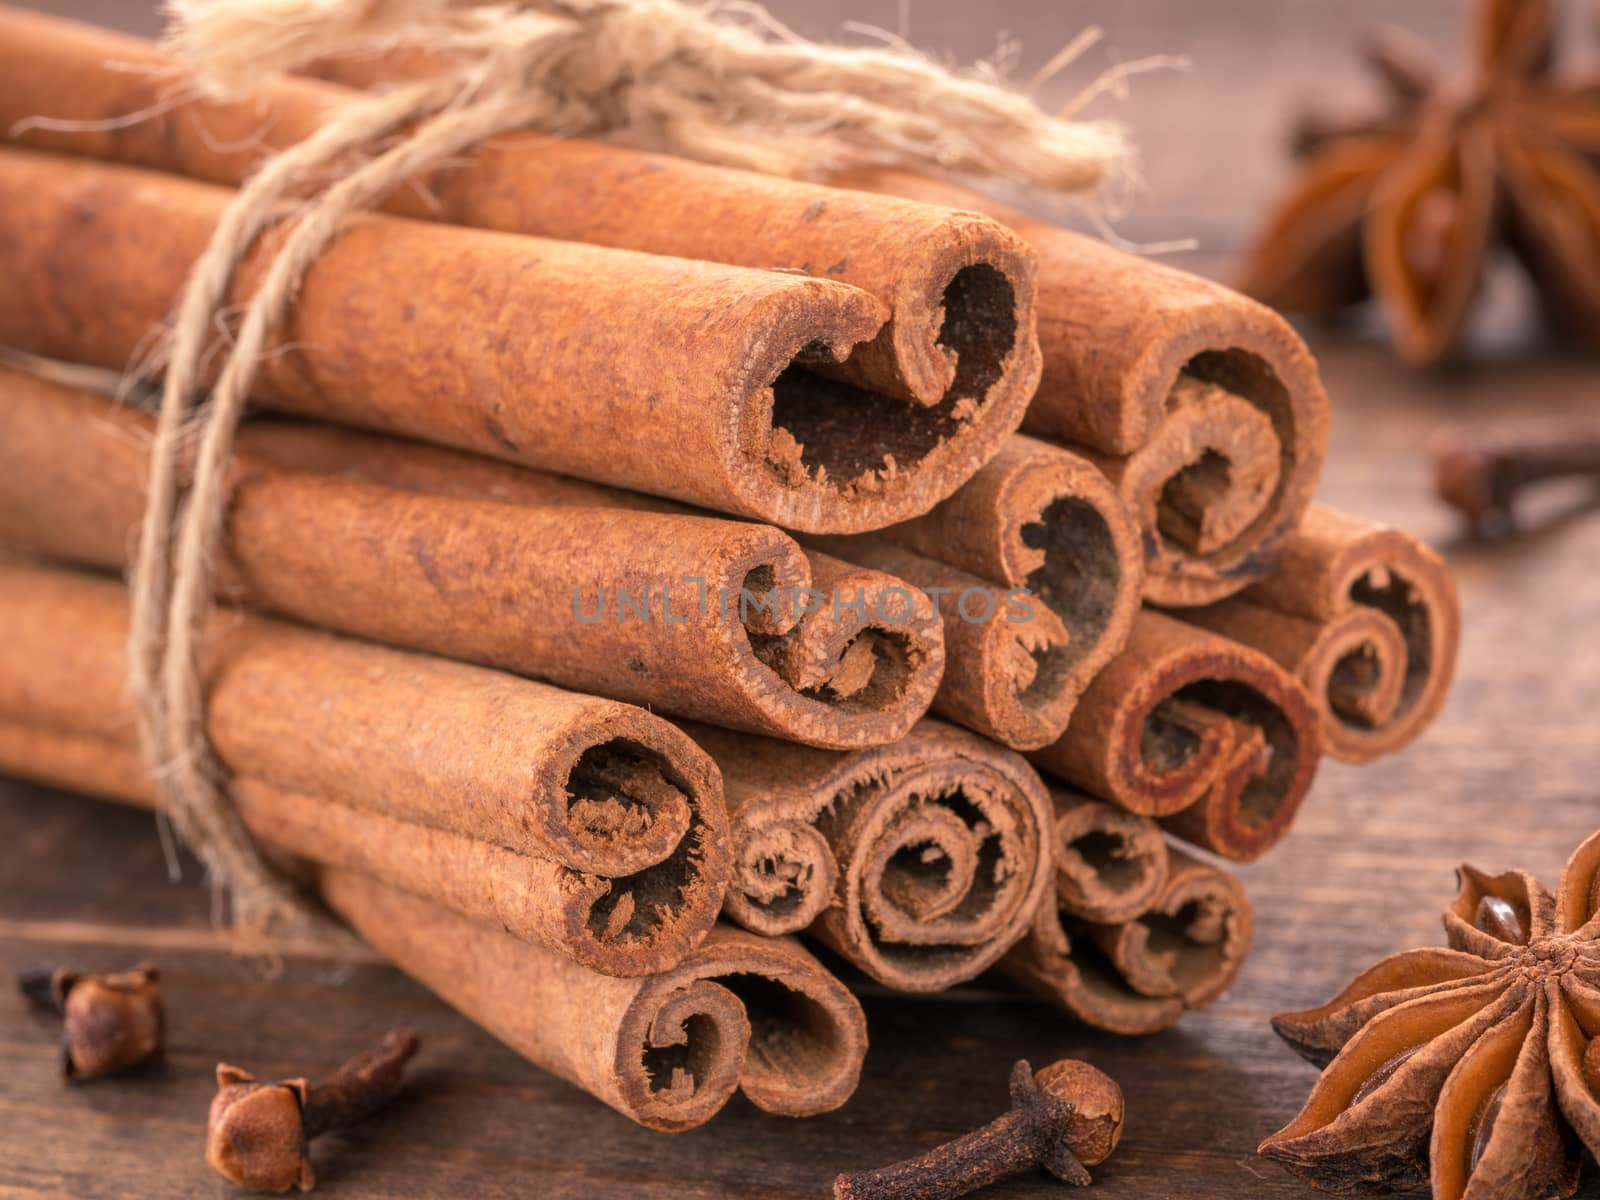 Ground cinnamon, cinnamon sticks, tied with jute rope on wooden background. Clove and star anise as background